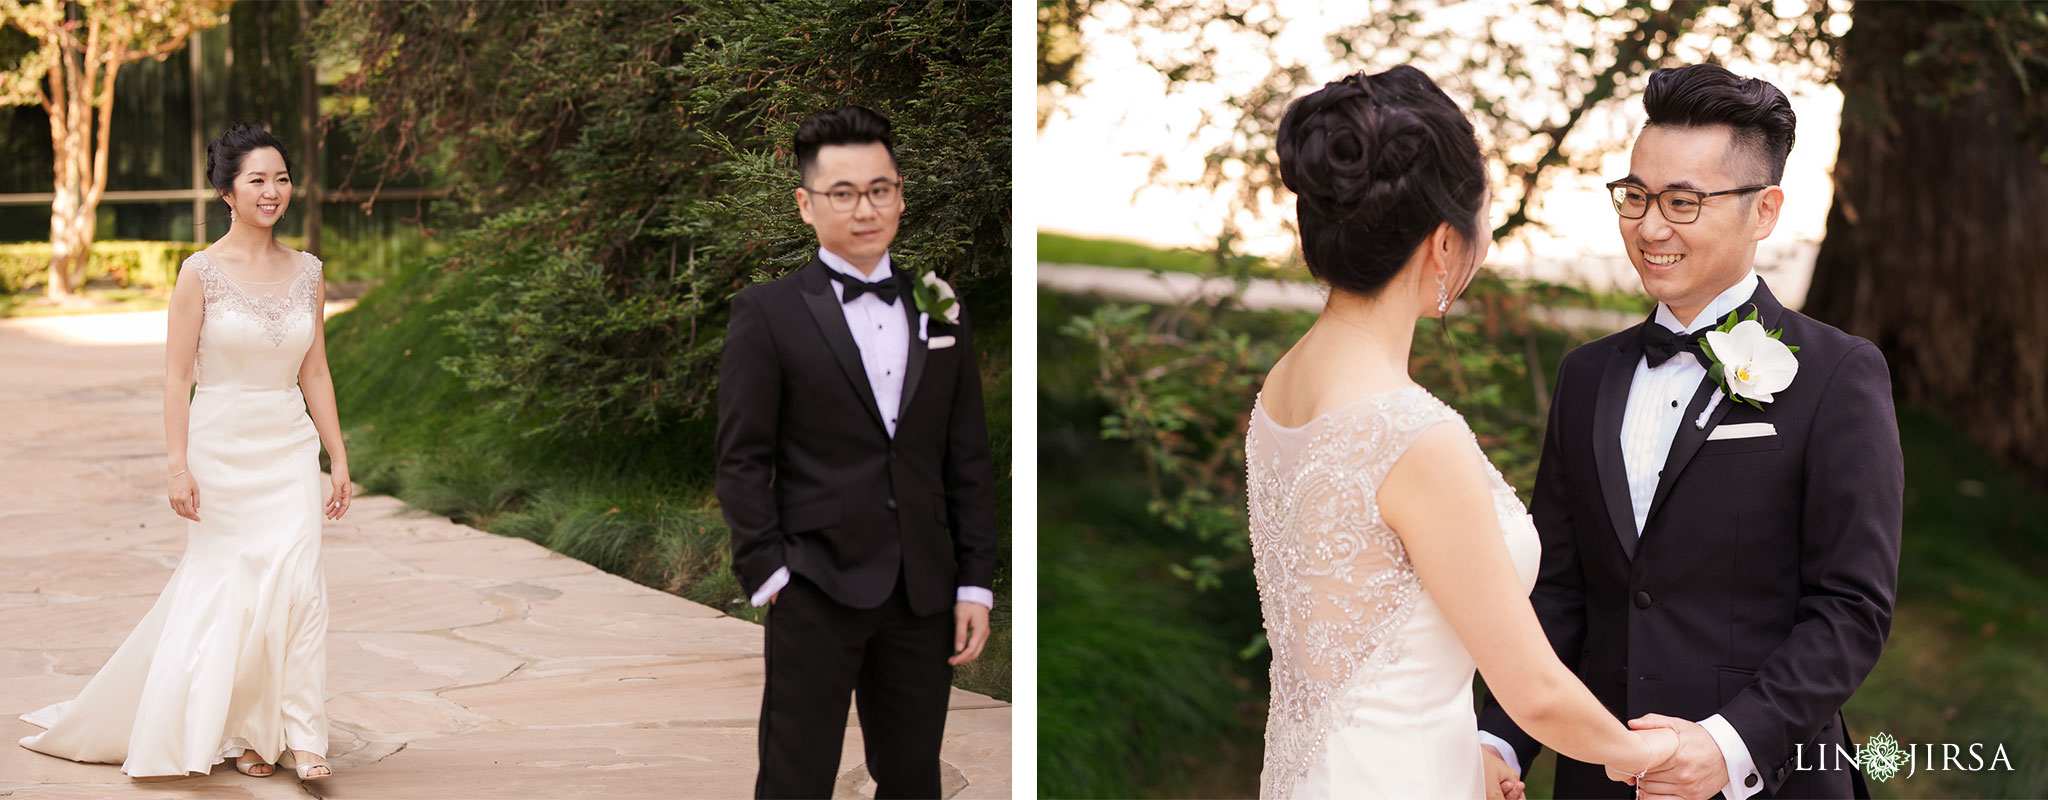 11 segerstrom center for the arts costa mesa wedding photography